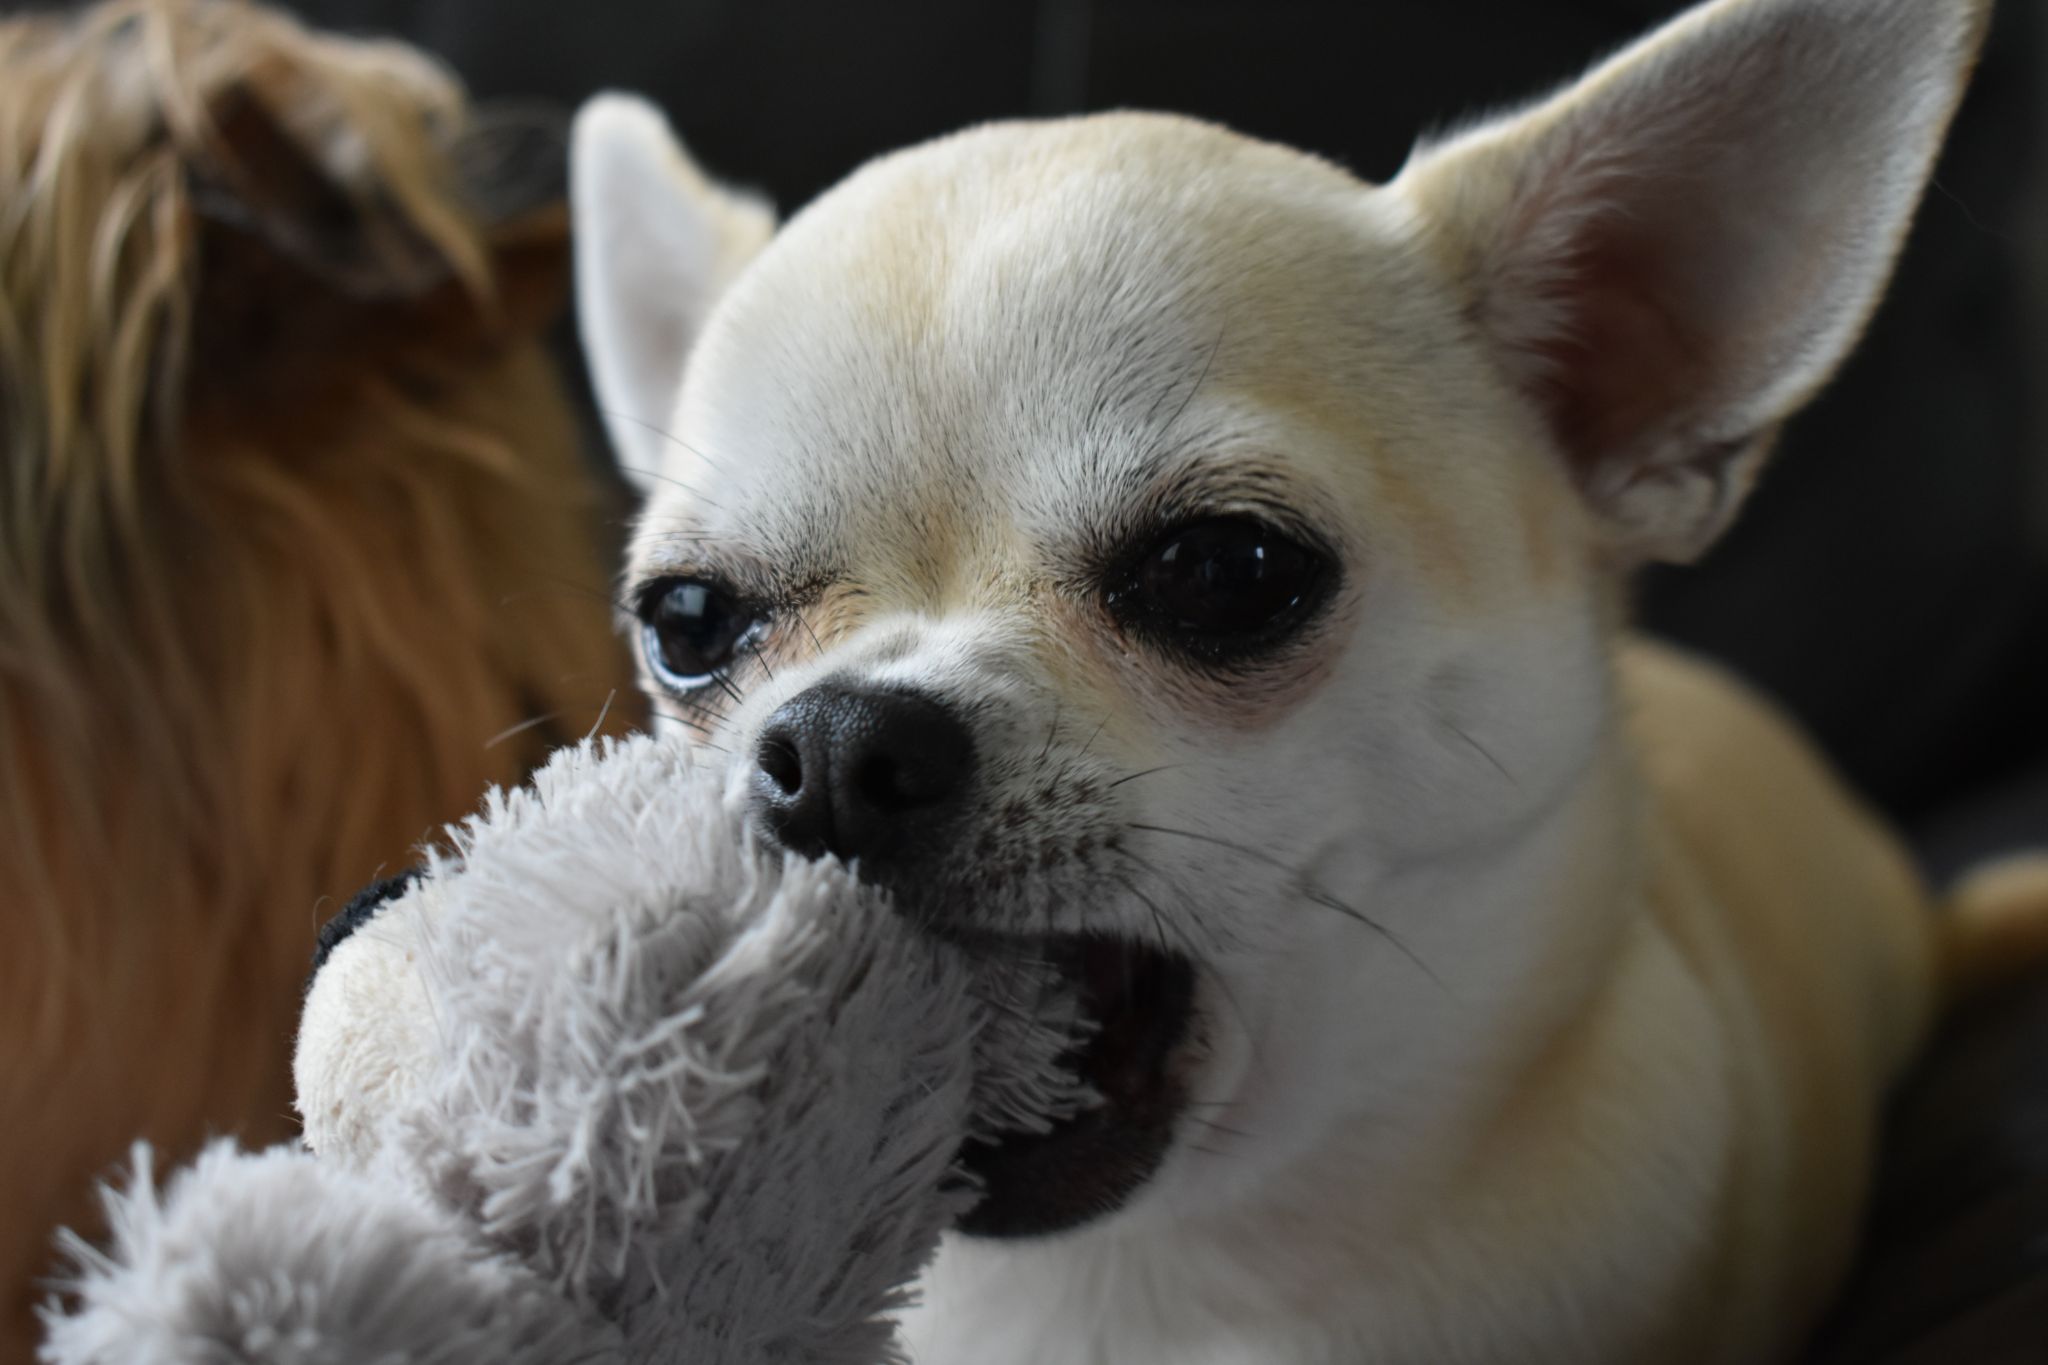 Why Are There So Many Chihuahuas In Shelters?